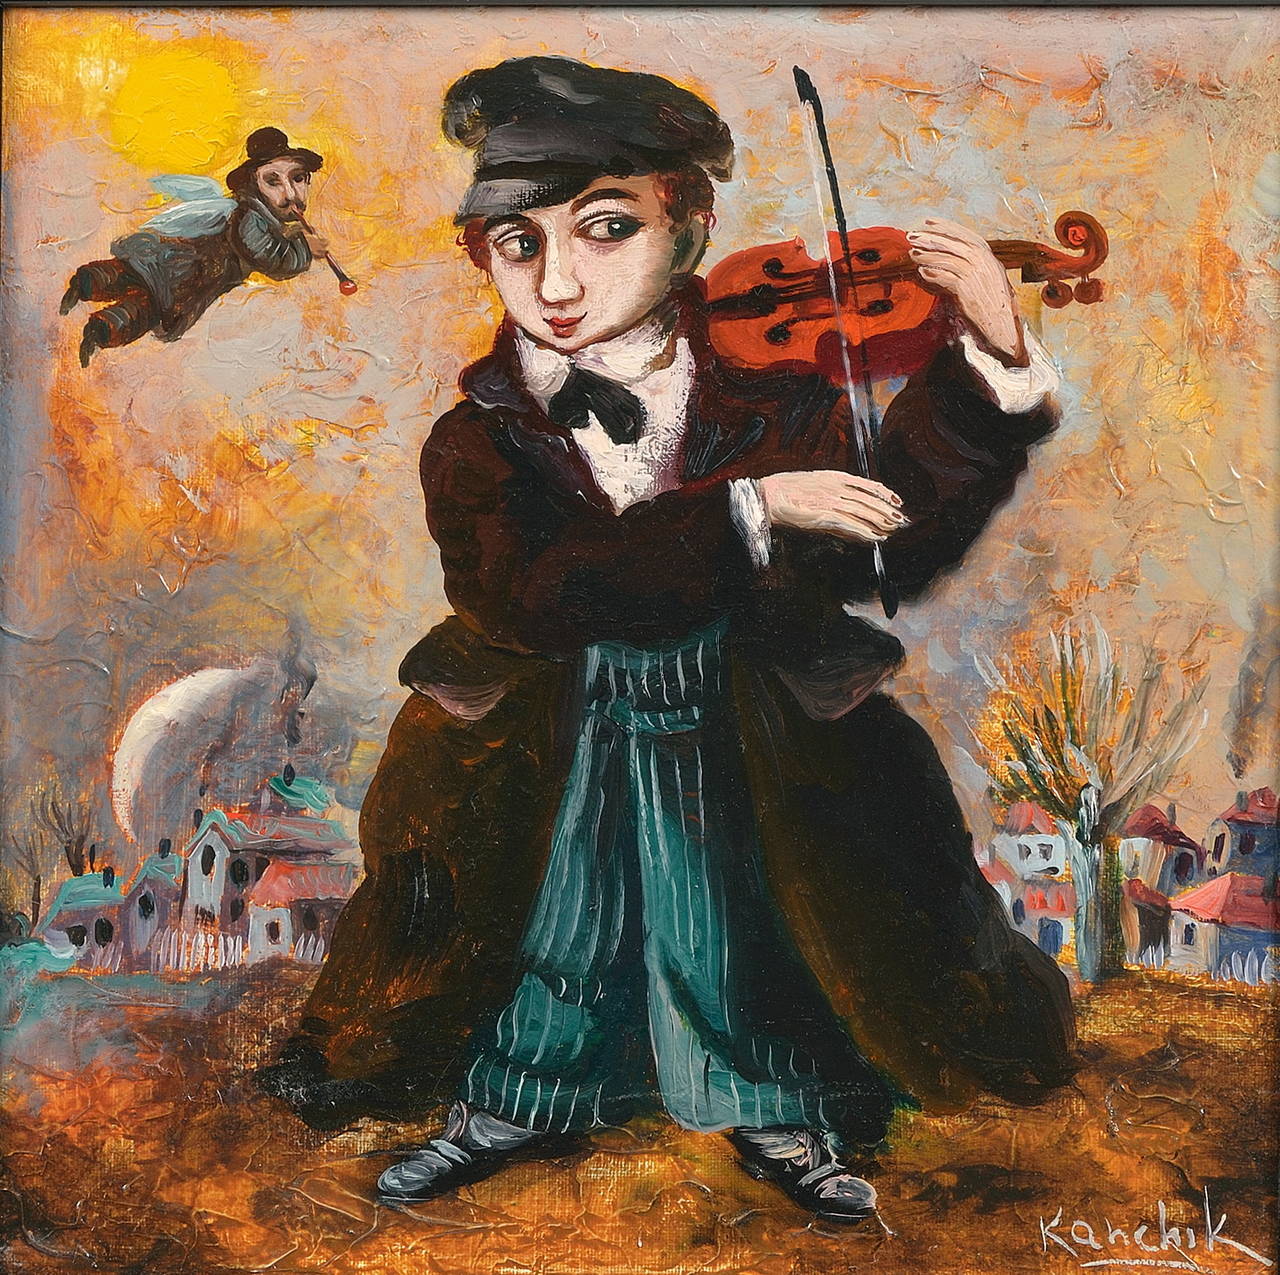 Oil on canvas.
From the series 'Homage to Marc Chagall.'
By Alexander Kanchik born in USSR (Moldavia) 1959, living in Ra'anana, Israel.
Signed 'Kanchik' lower right.
Framed very ornate and exceptional quality wood.
Dimensions: 40 cm x 40 cm